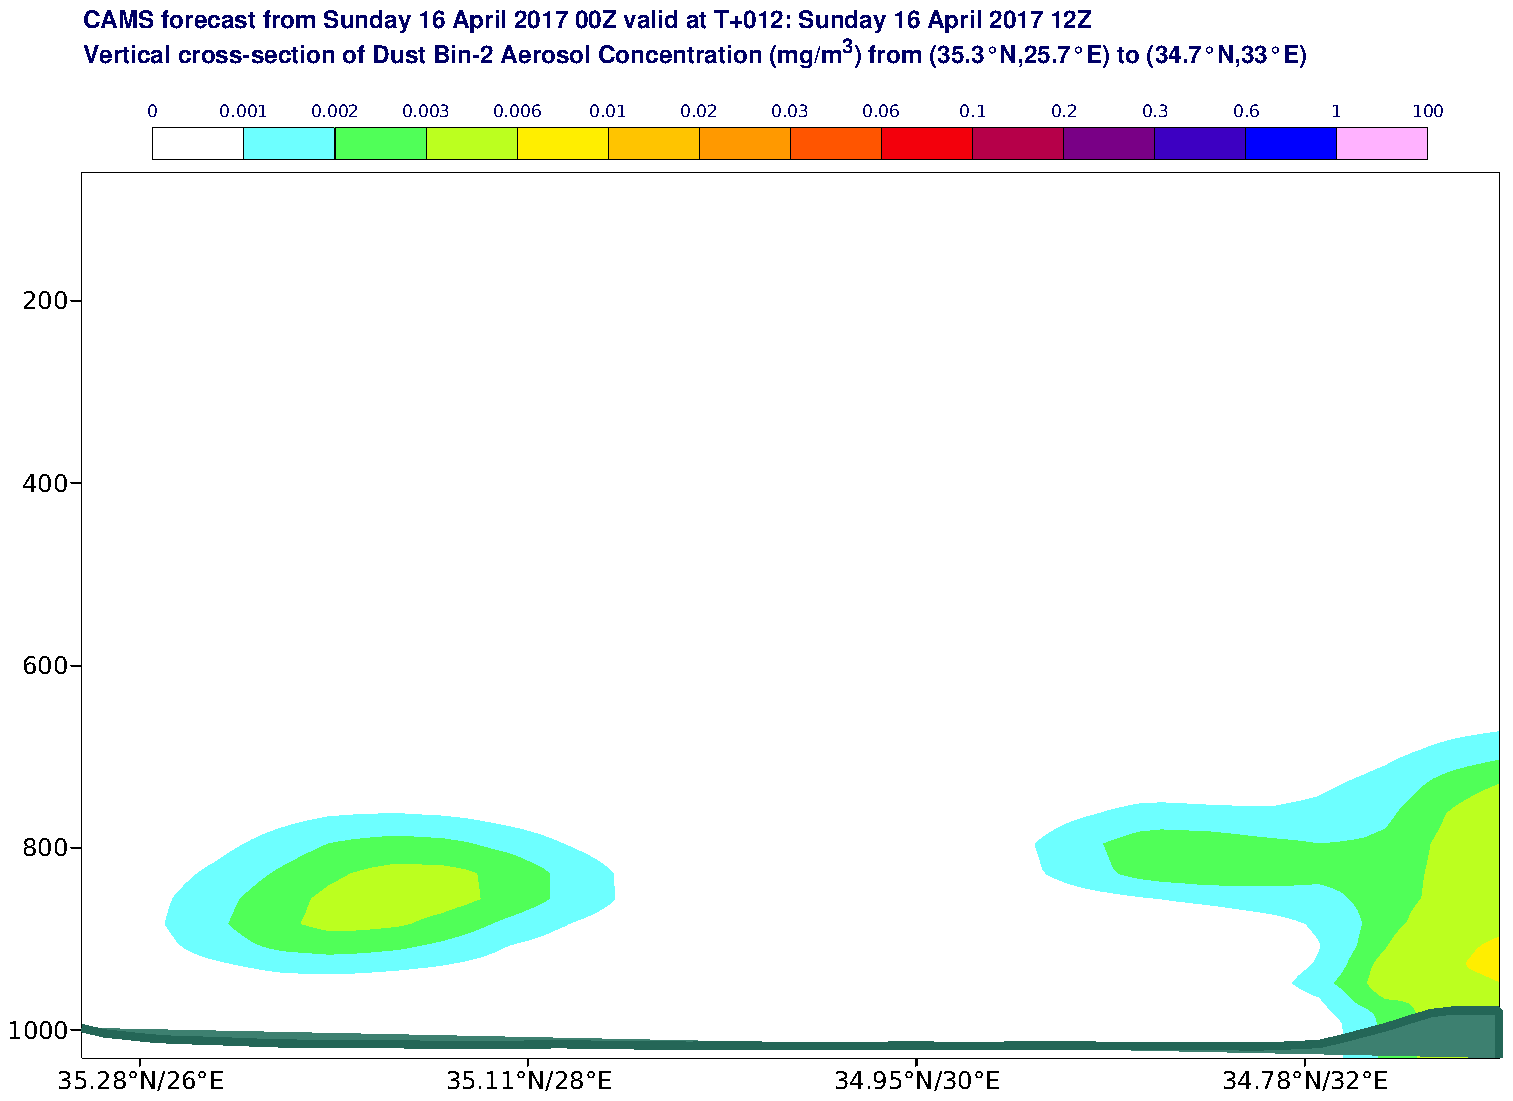 Vertical cross-section of Dust Bin-2 Aerosol Concentration (mg/m3) valid at T12 - 2017-04-16 12:00